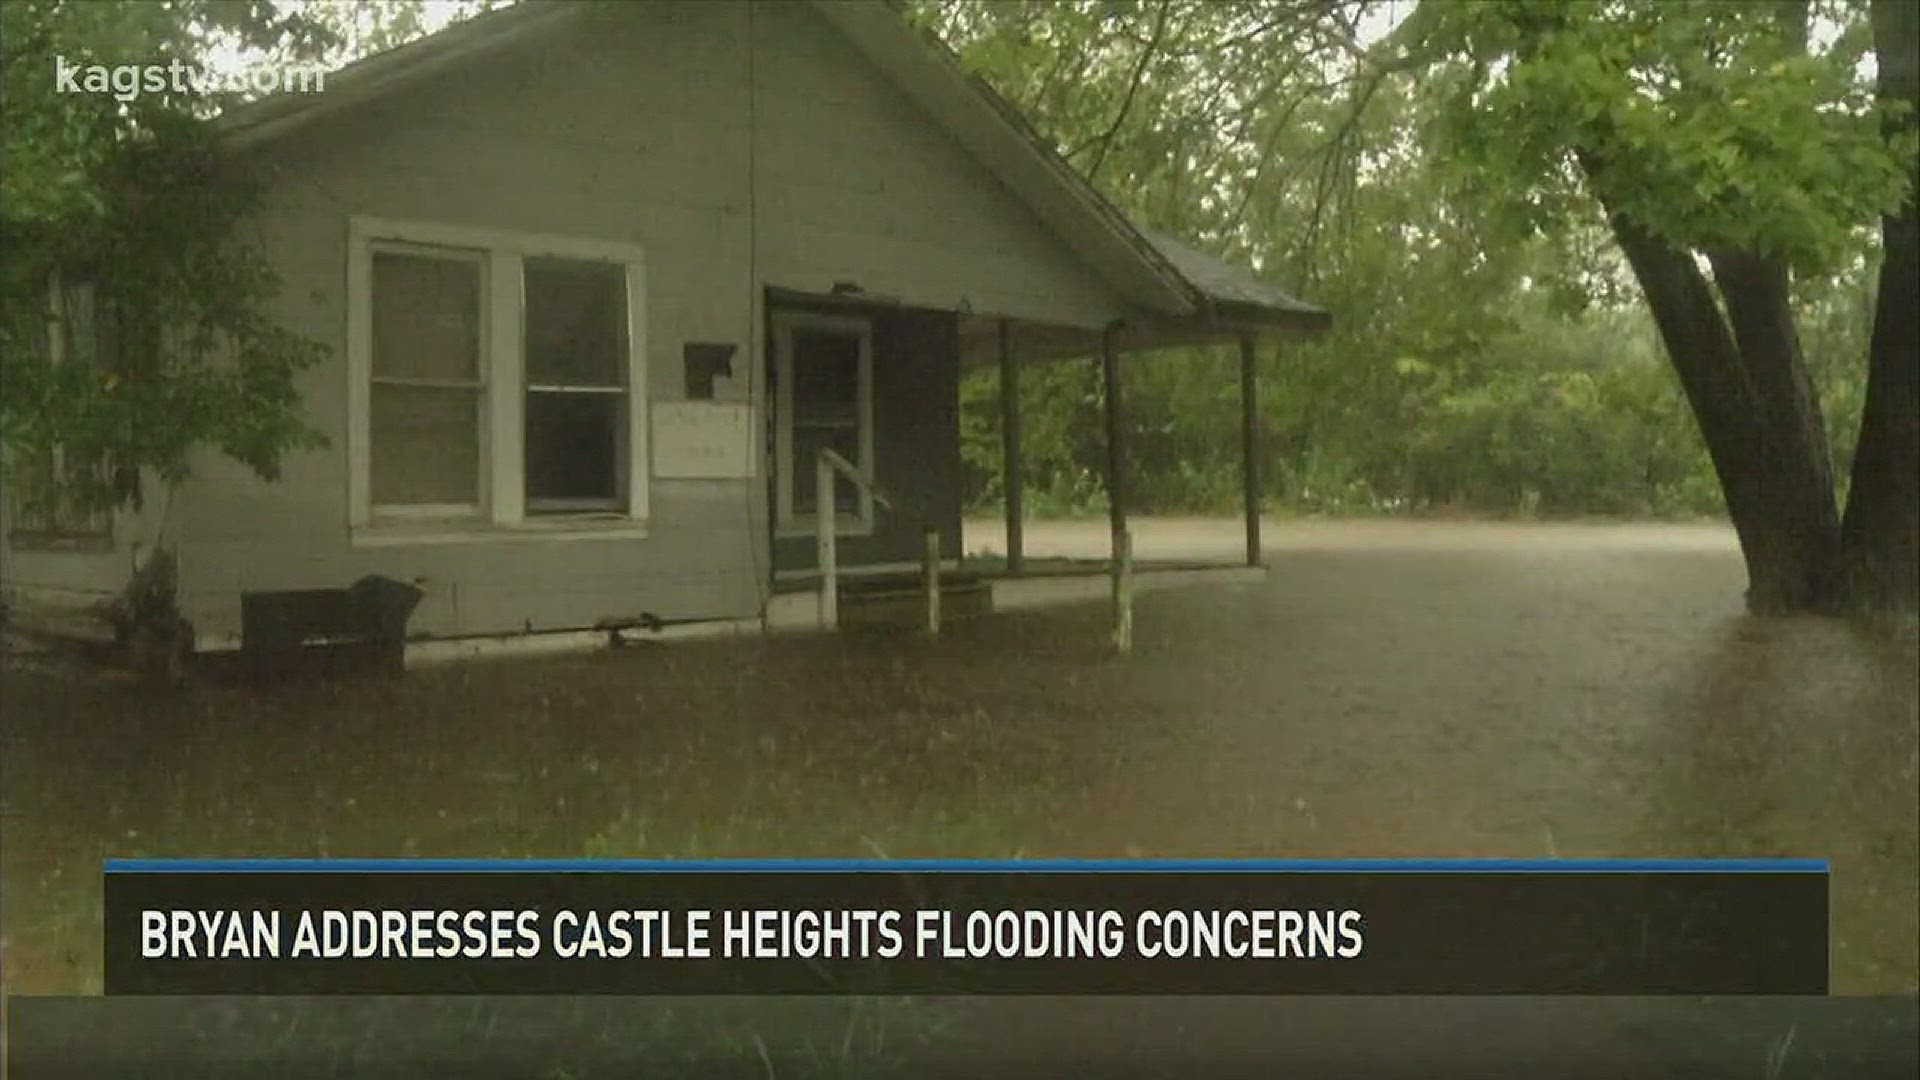 Today, the Bryan City Council held a workshop to address flooding concerns and develop possible drainage solutions for the Castle Heights neighborhood. In recent years, Castle Heights has seen some extreme flooding including during Hurricane Harvey, leavi